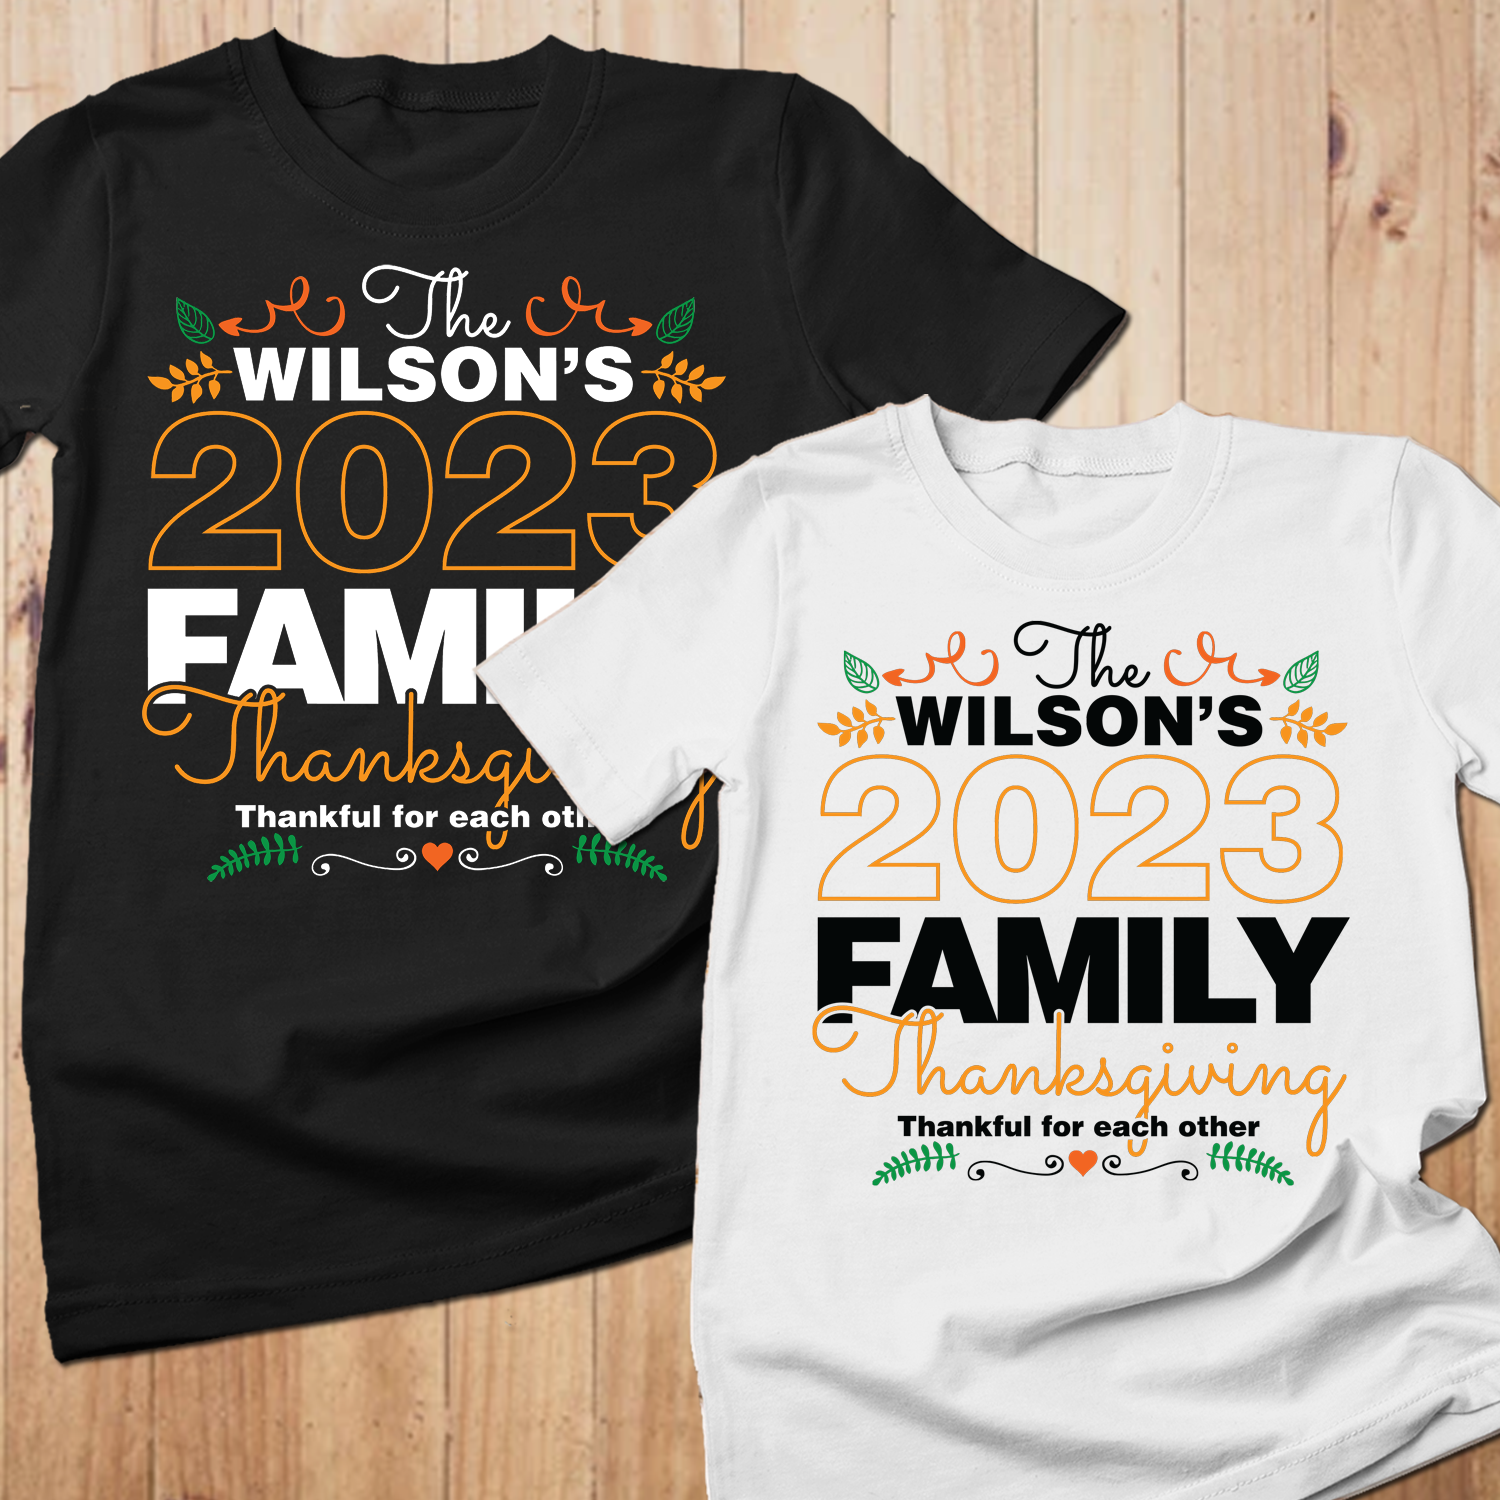 Thankful for each other 2024 thanksgiving shirts family, family shirts for thanksgiving, Thankful Shirt, thanksgiving shirts for the family - Wilson Design Group